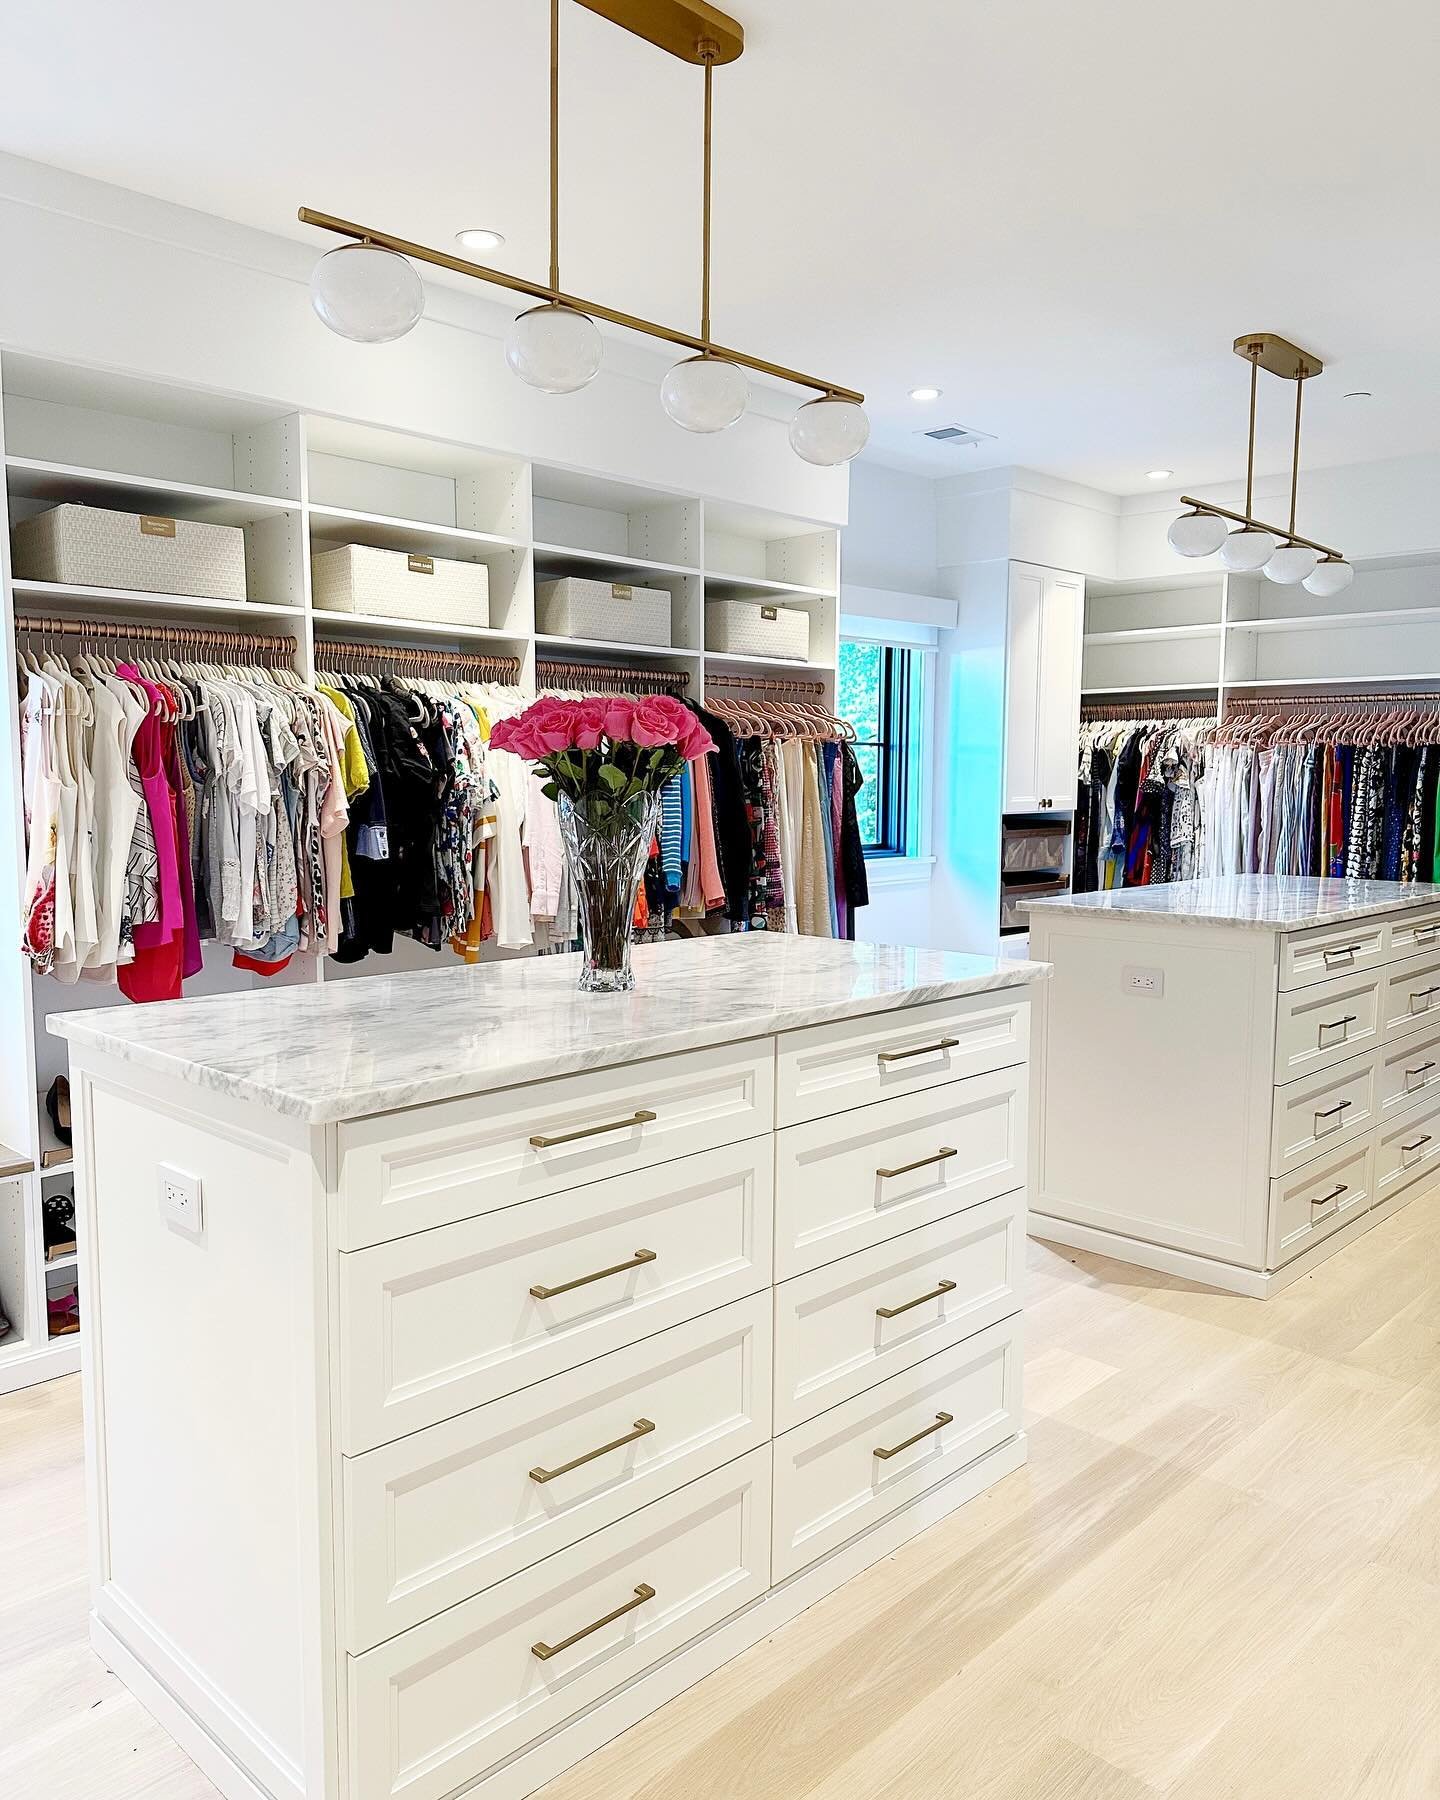 Save under CLOSET GOALS&thinsp;
&thinsp;
Minimal + Beautiful &thinsp;
&thinsp;
Everything has a home all drawers are filed folded, color coordinated, and labeled.  We love a closet with breathing room. &thinsp;
&thinsp;
#closetgoals #walkinclosetdesi